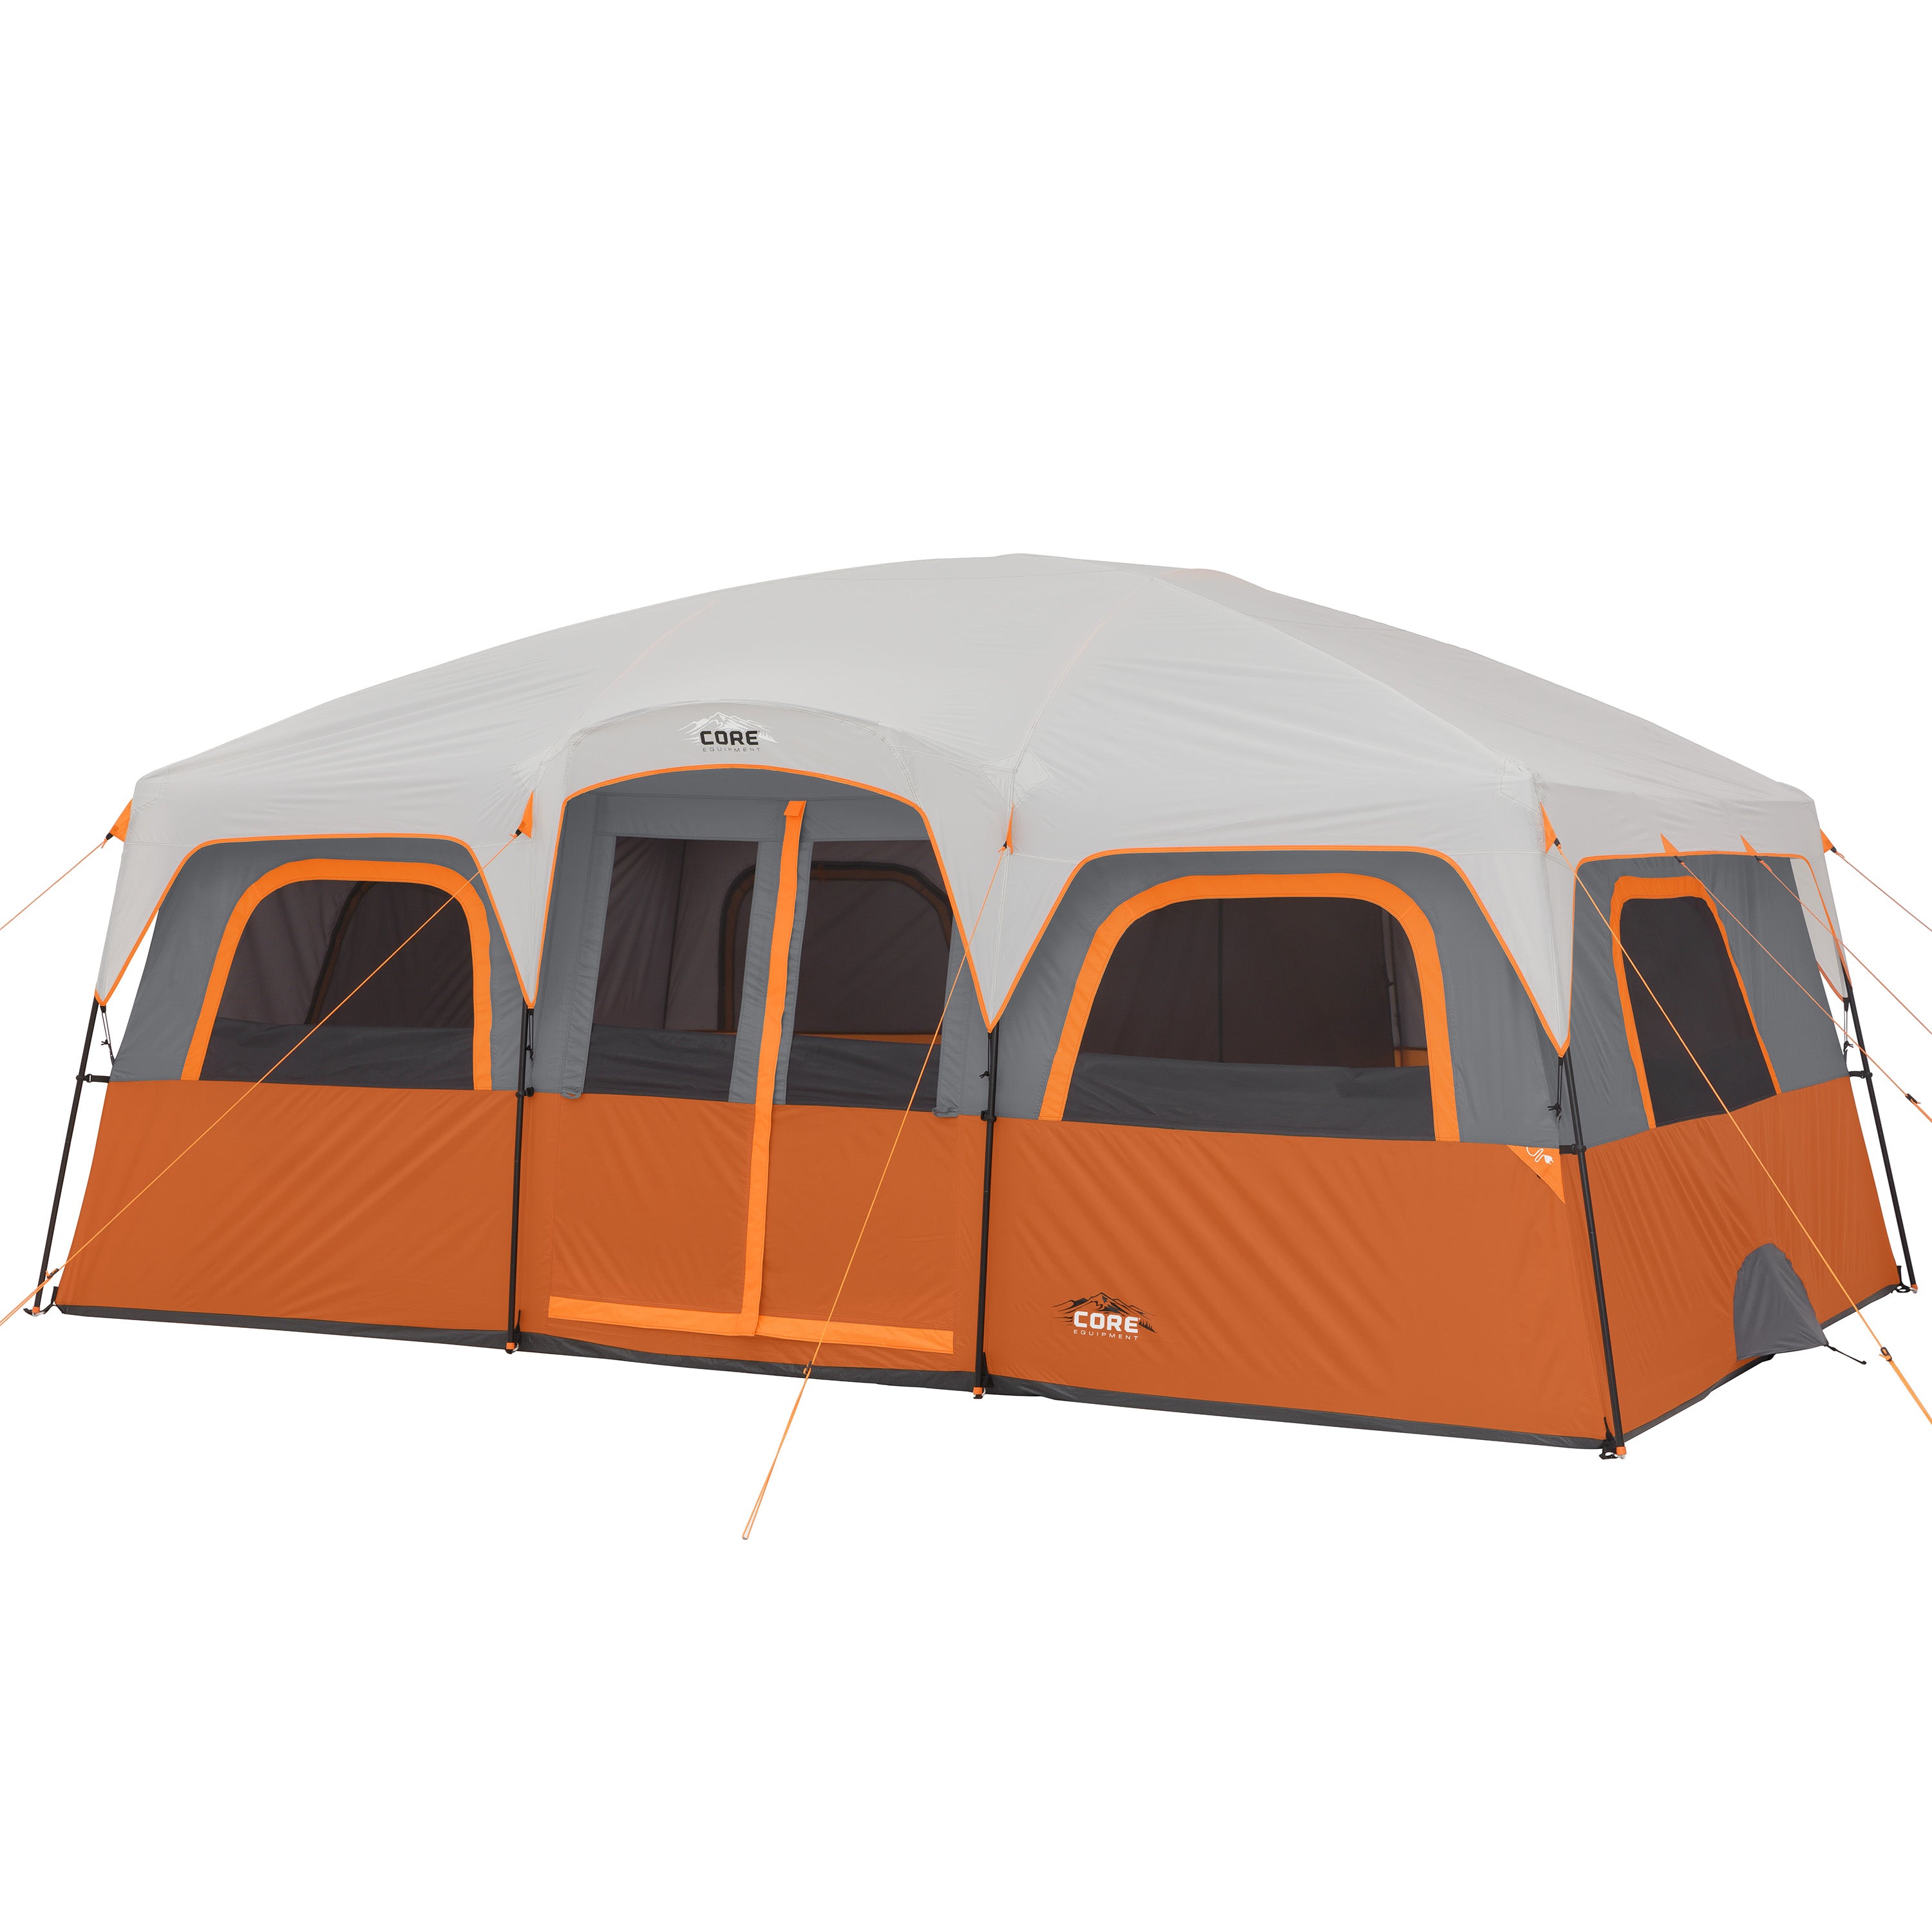 12 Person Straight Wall Cabin Tent 16' x 11